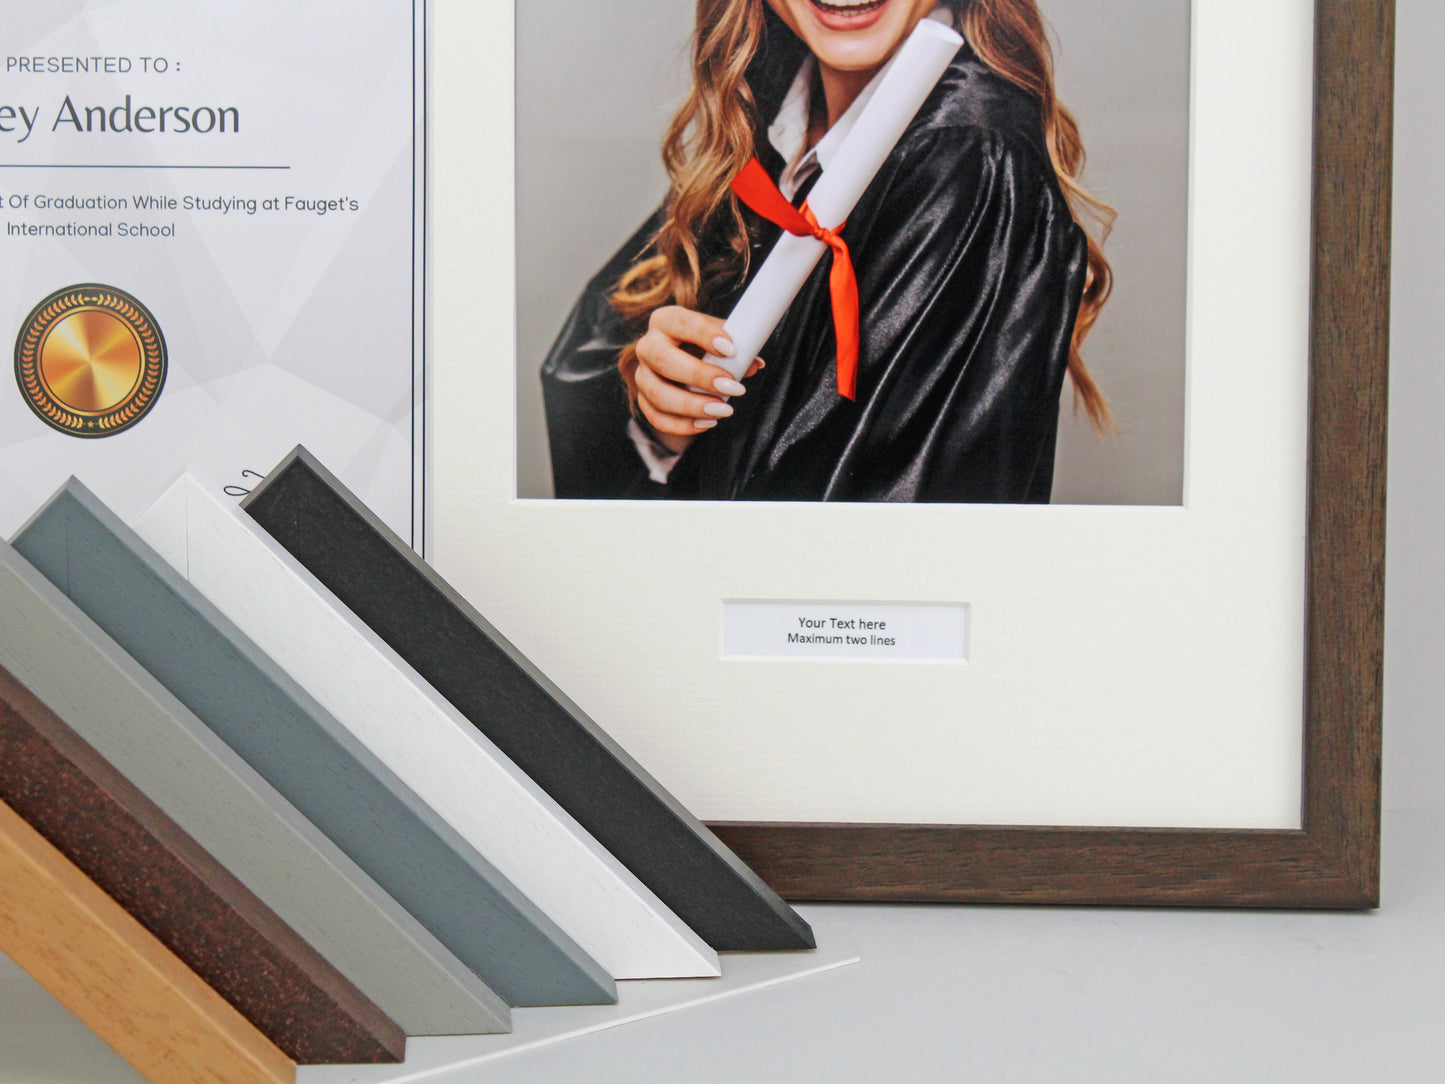 Personalised Certificate, Graduation, Diploma Frame with Two Photos. Suits an A4 sized Photo/Certificate and Two 5x7" Photos.